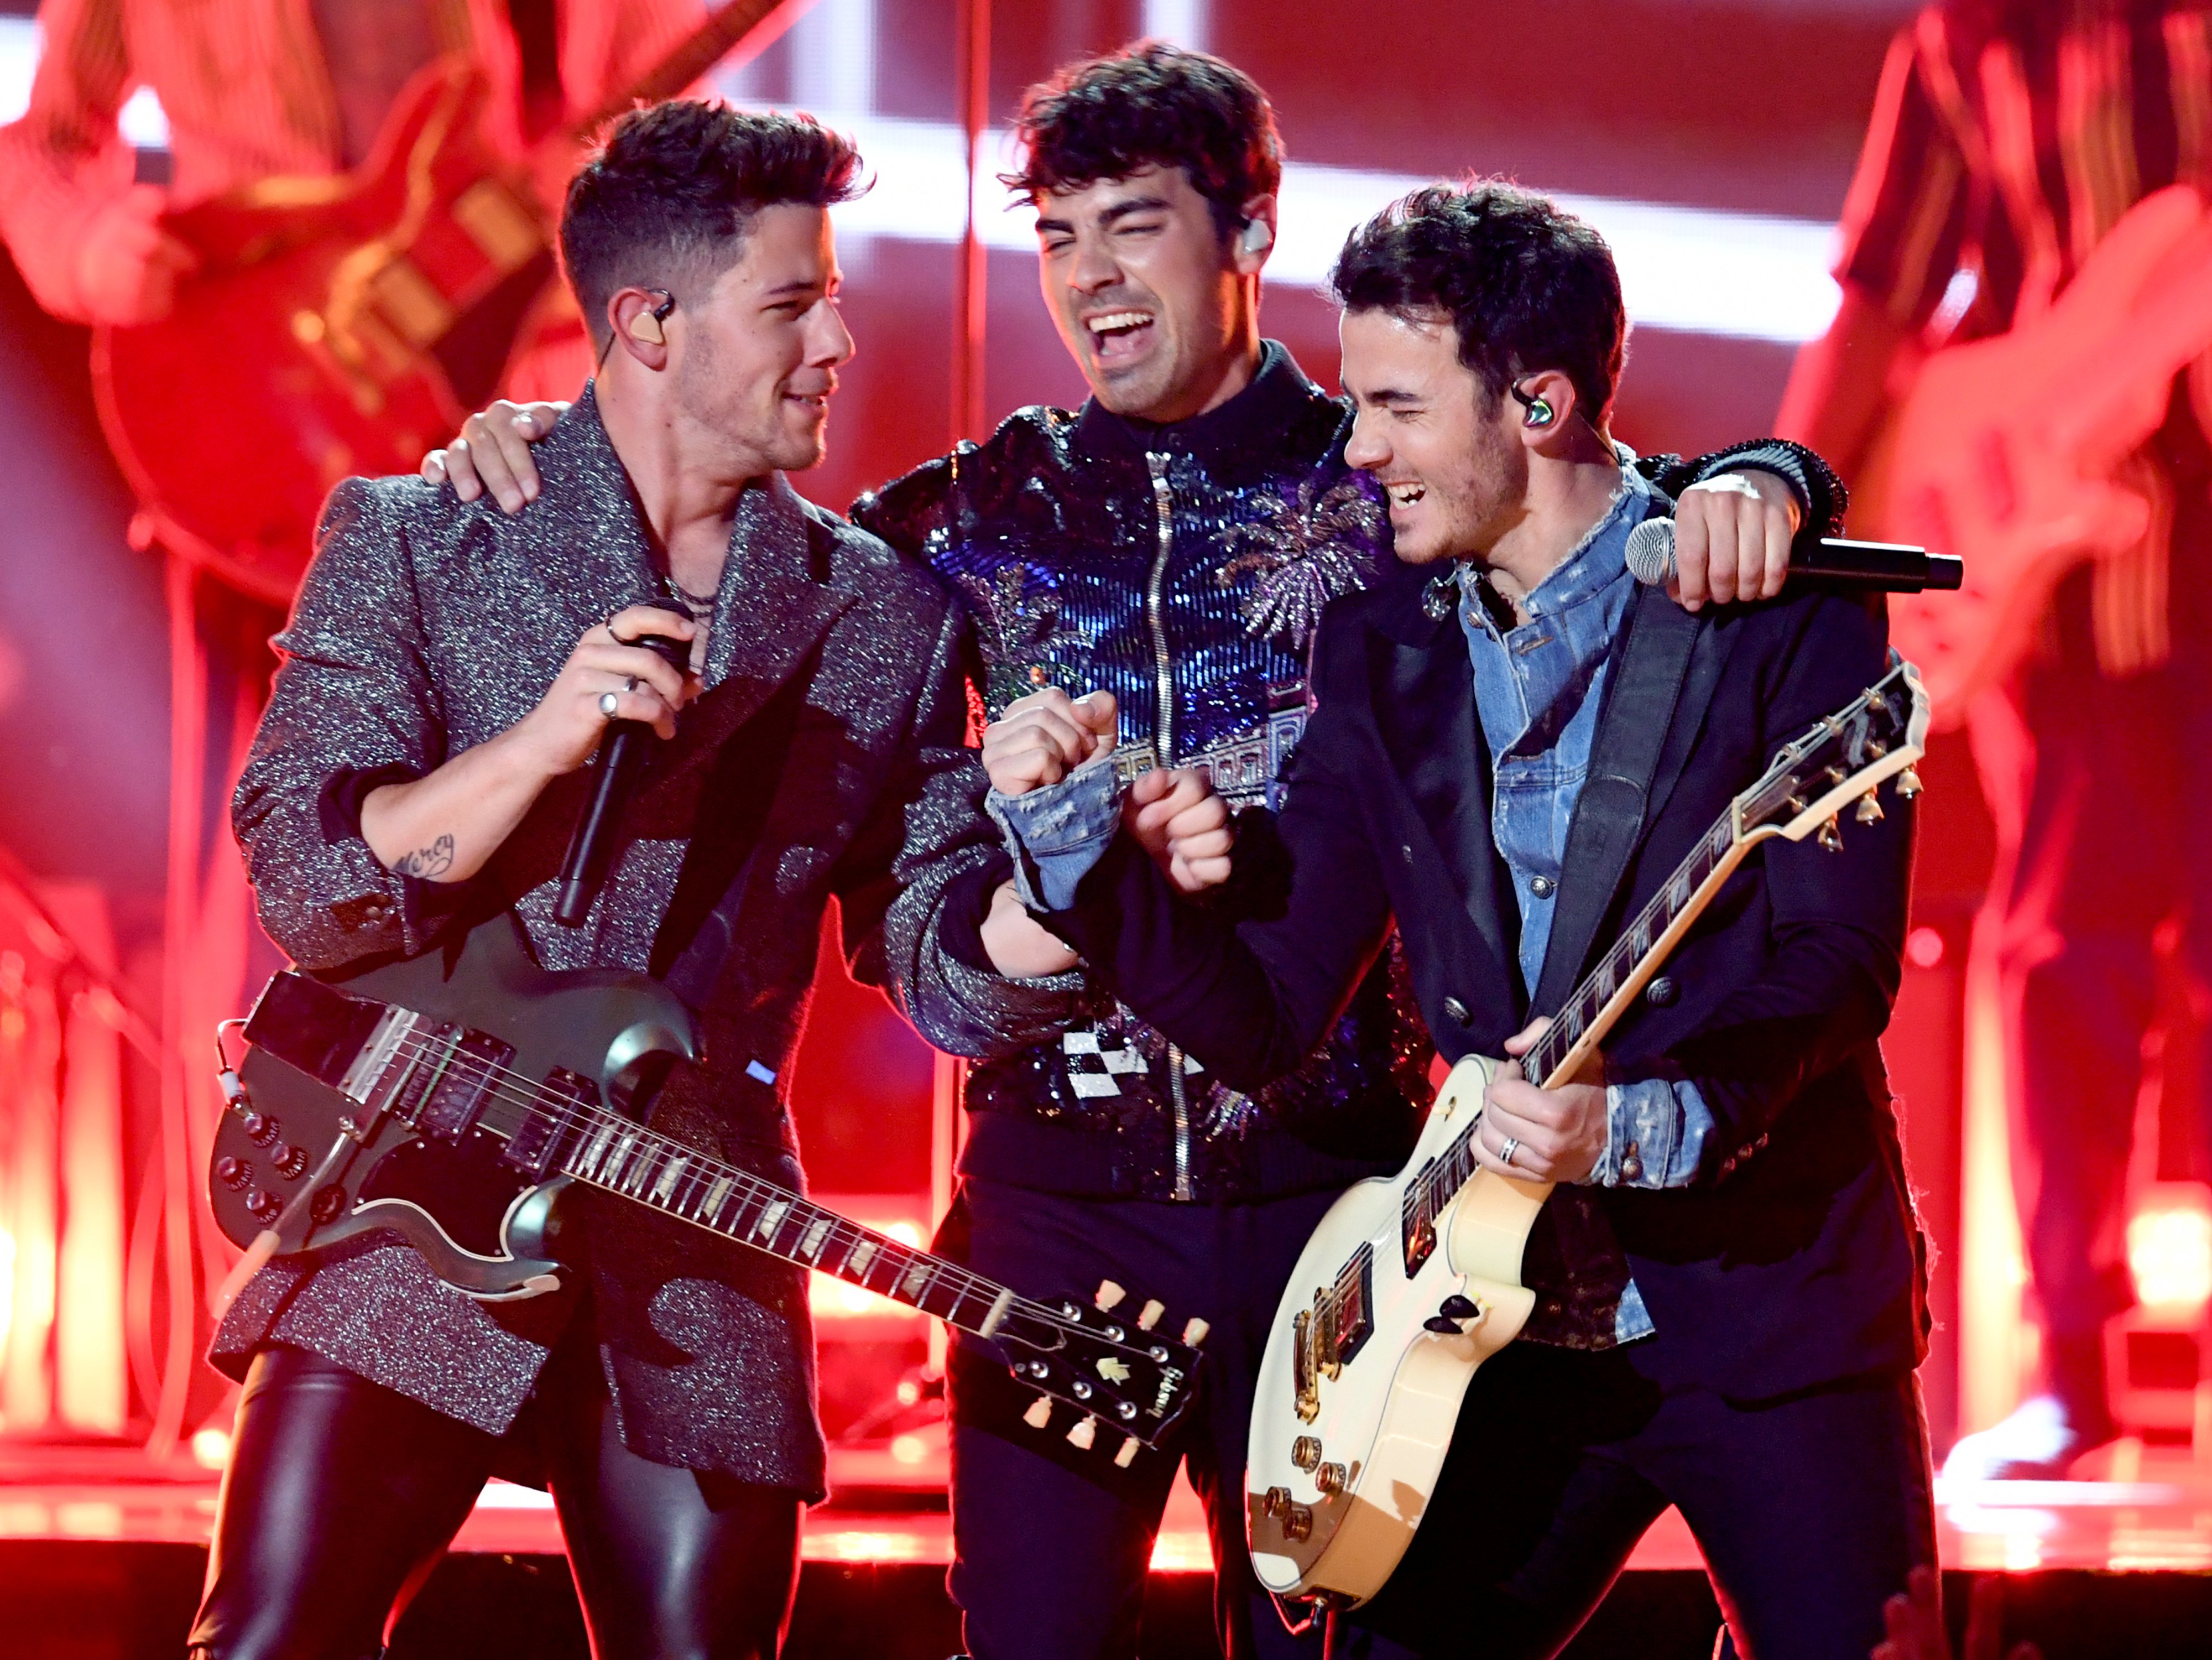 Nick Jonas, Joe Jonas, and Kevin Jonas of Jonas Brothers perform onstage during the 2019 Billboard Music Awards at MGM Grand Garden Arena on May 01, 2019 in Las Vegas, Nevada | Photo: Getty Images